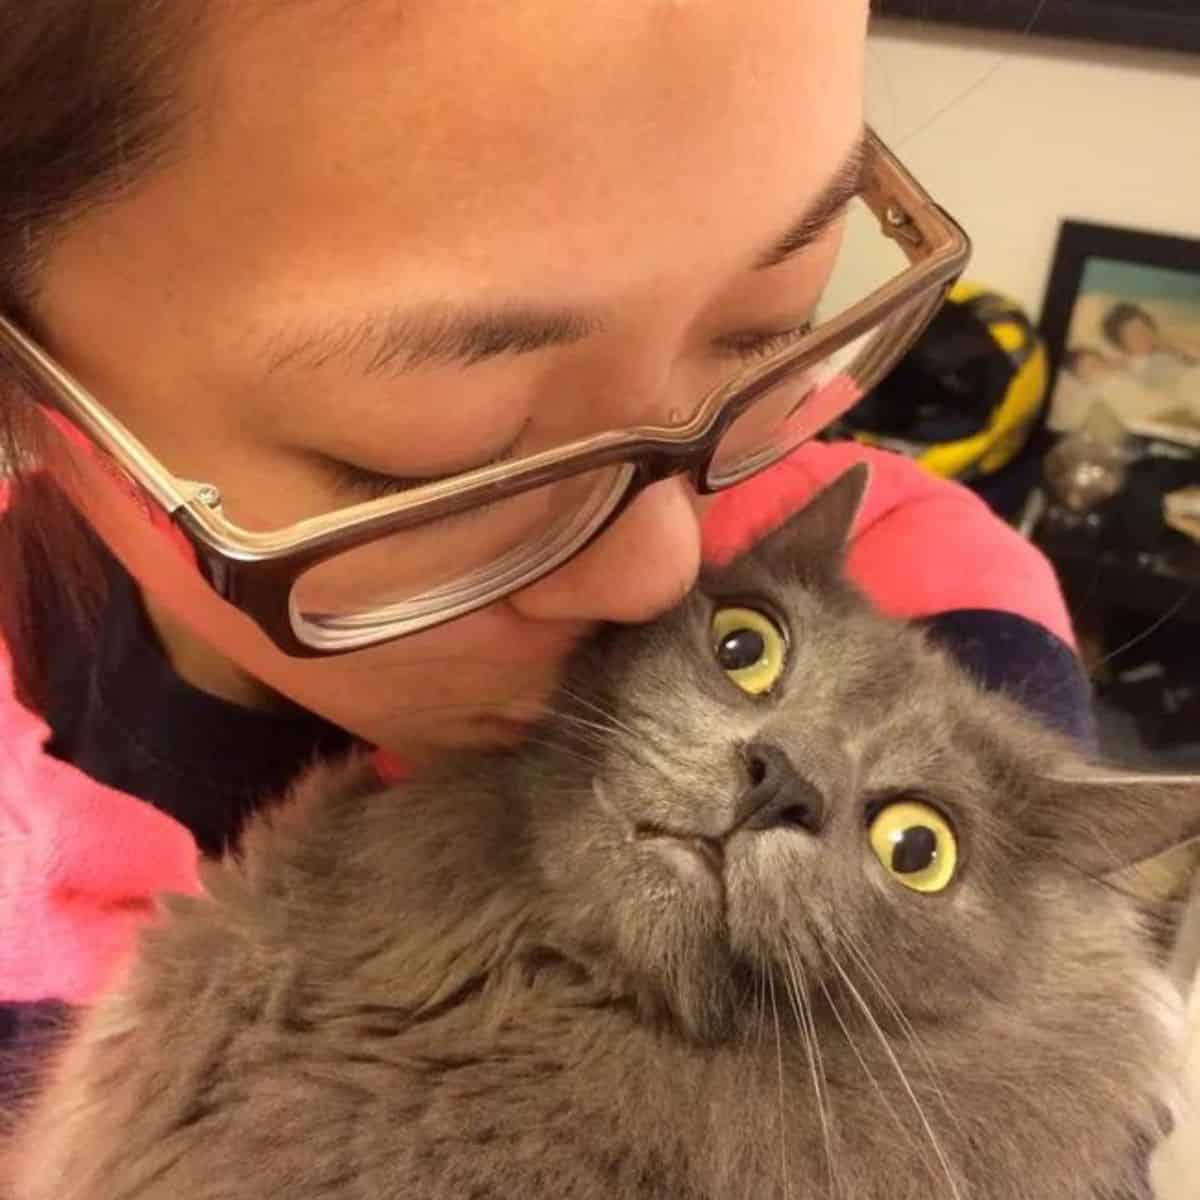 a woman with glasses kisses her cat